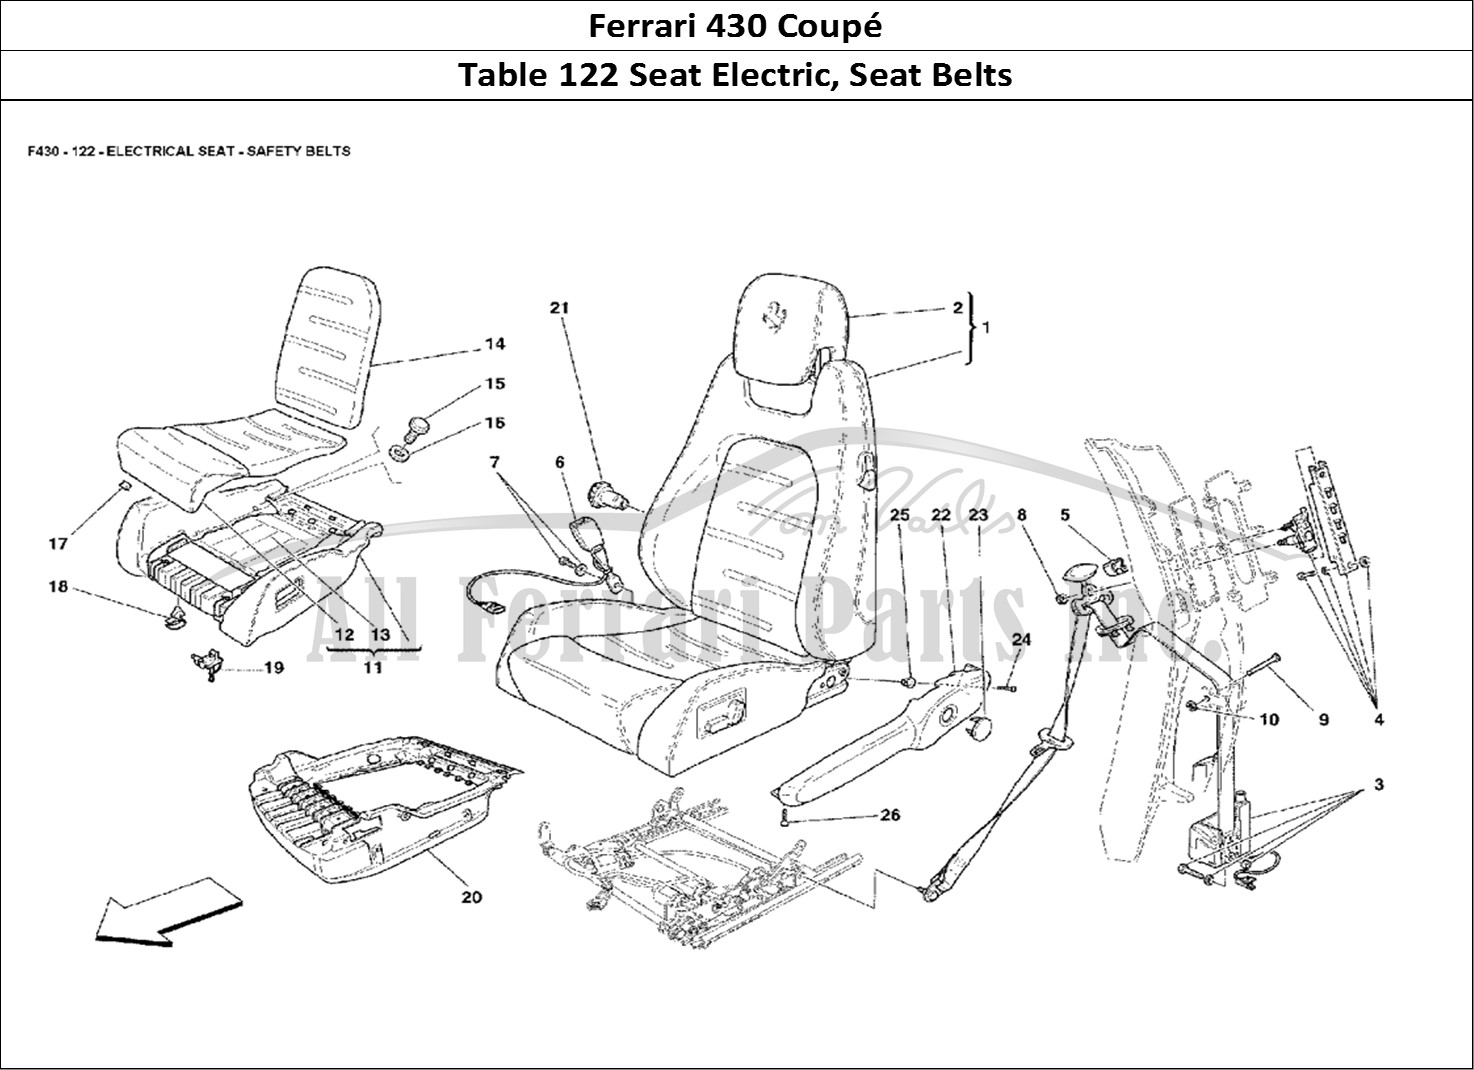 Ferrari Parts Ferrari 430 Coup Page 122 Electrical Seat - Safety